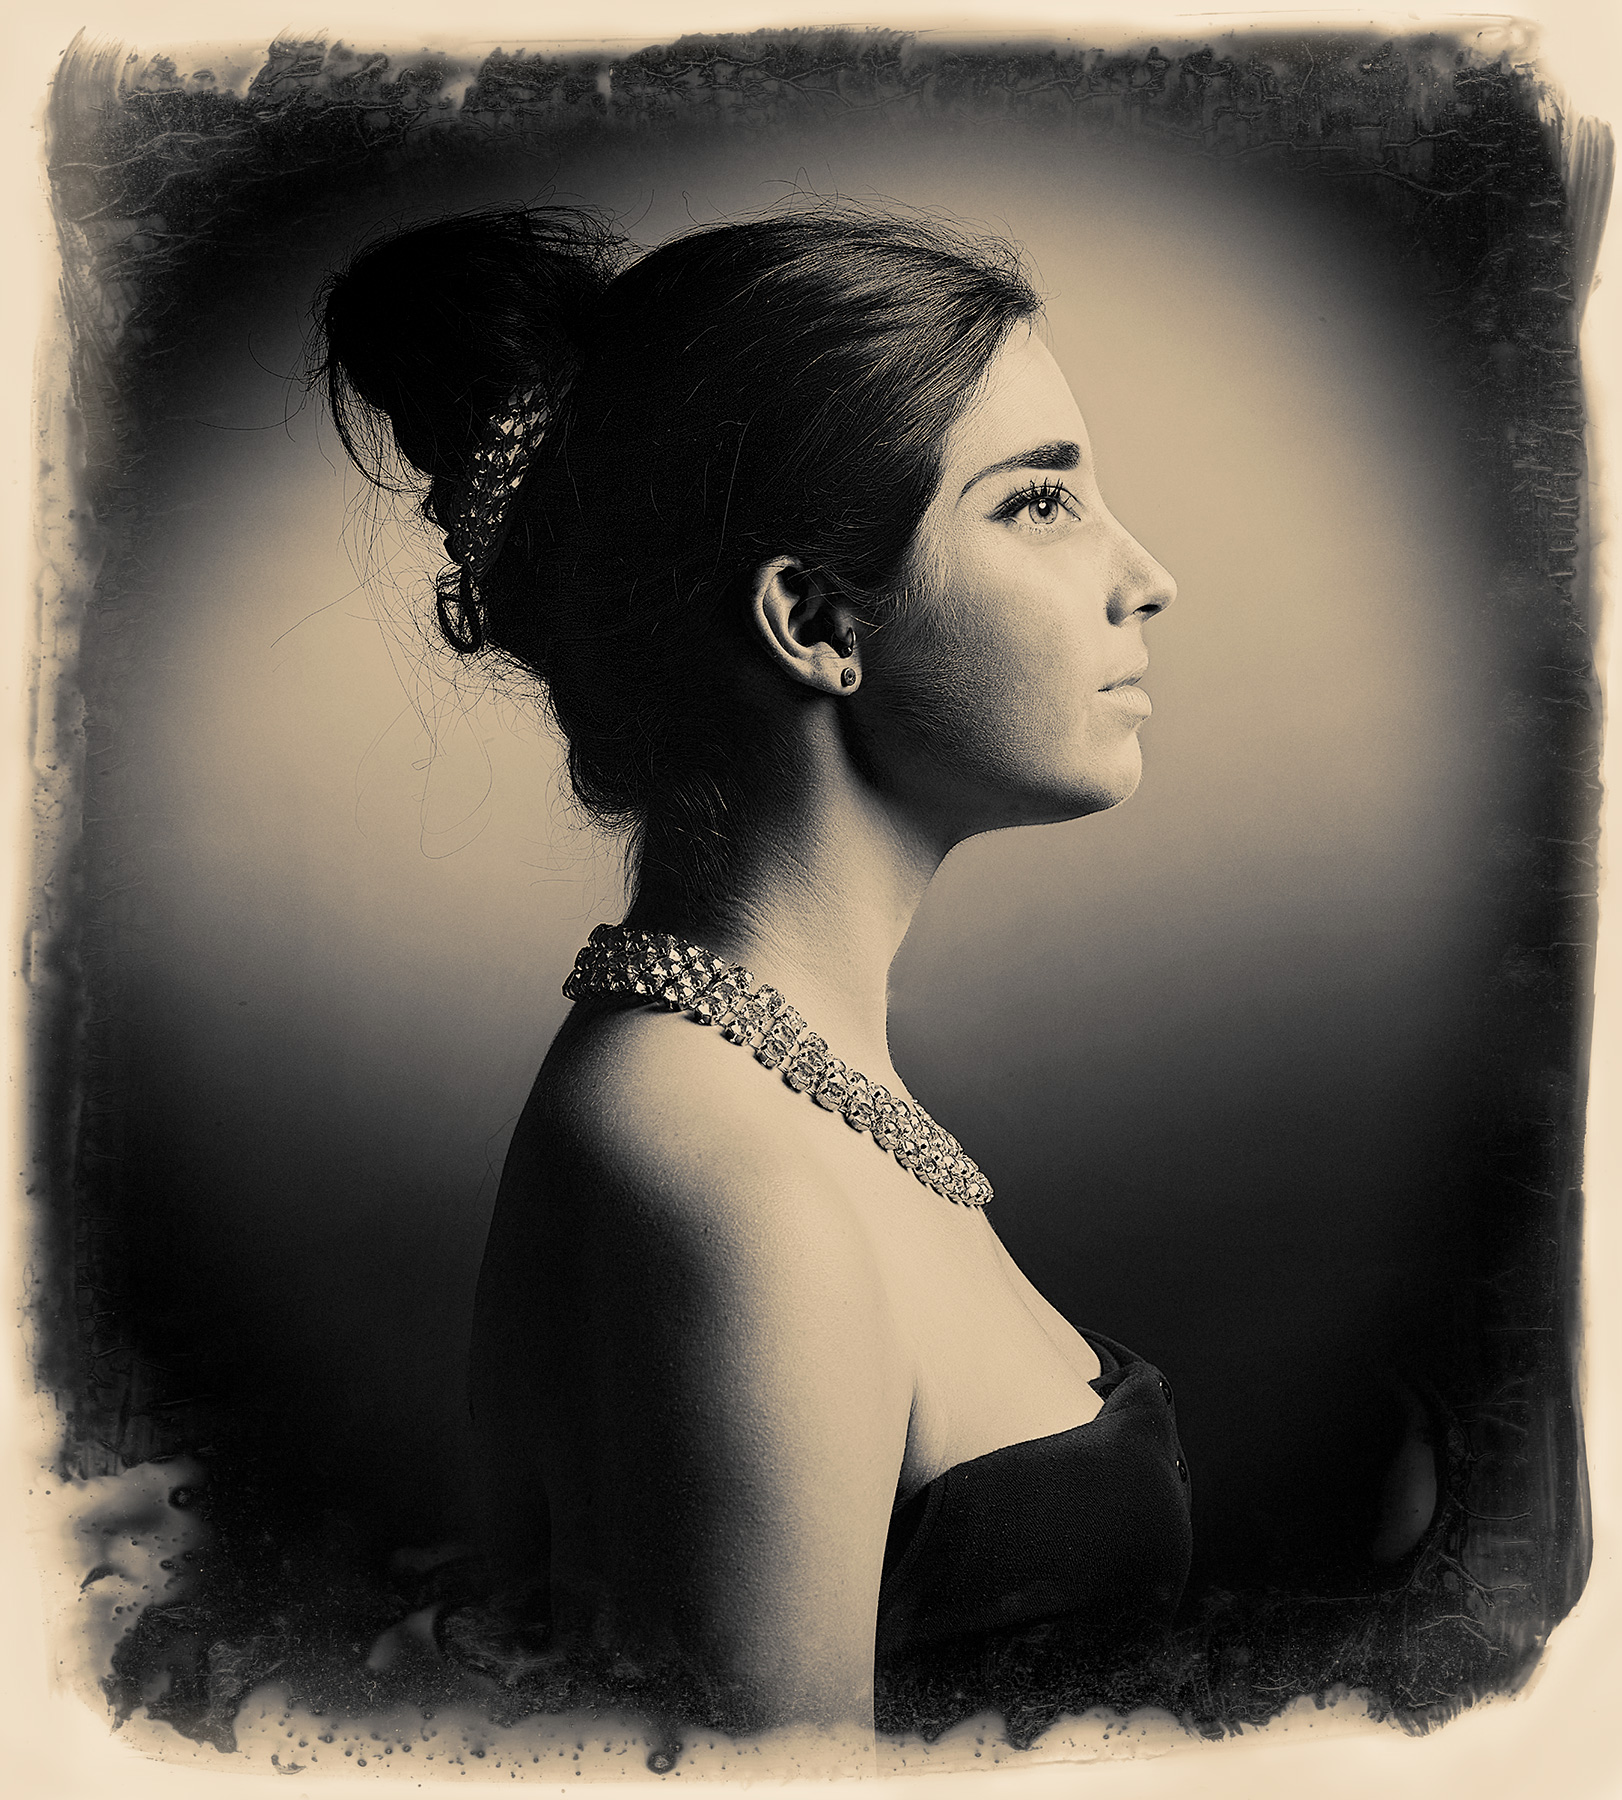 The woman in the picture is wearing a necklace and has her hair up. In black and white, the image offers a timeless and artistic expression. The background is blurred and nonspecific, drawing the viewer's focus to the person in the foreground. A detailed necklace worn around the person's neck adds a touch of elegance.